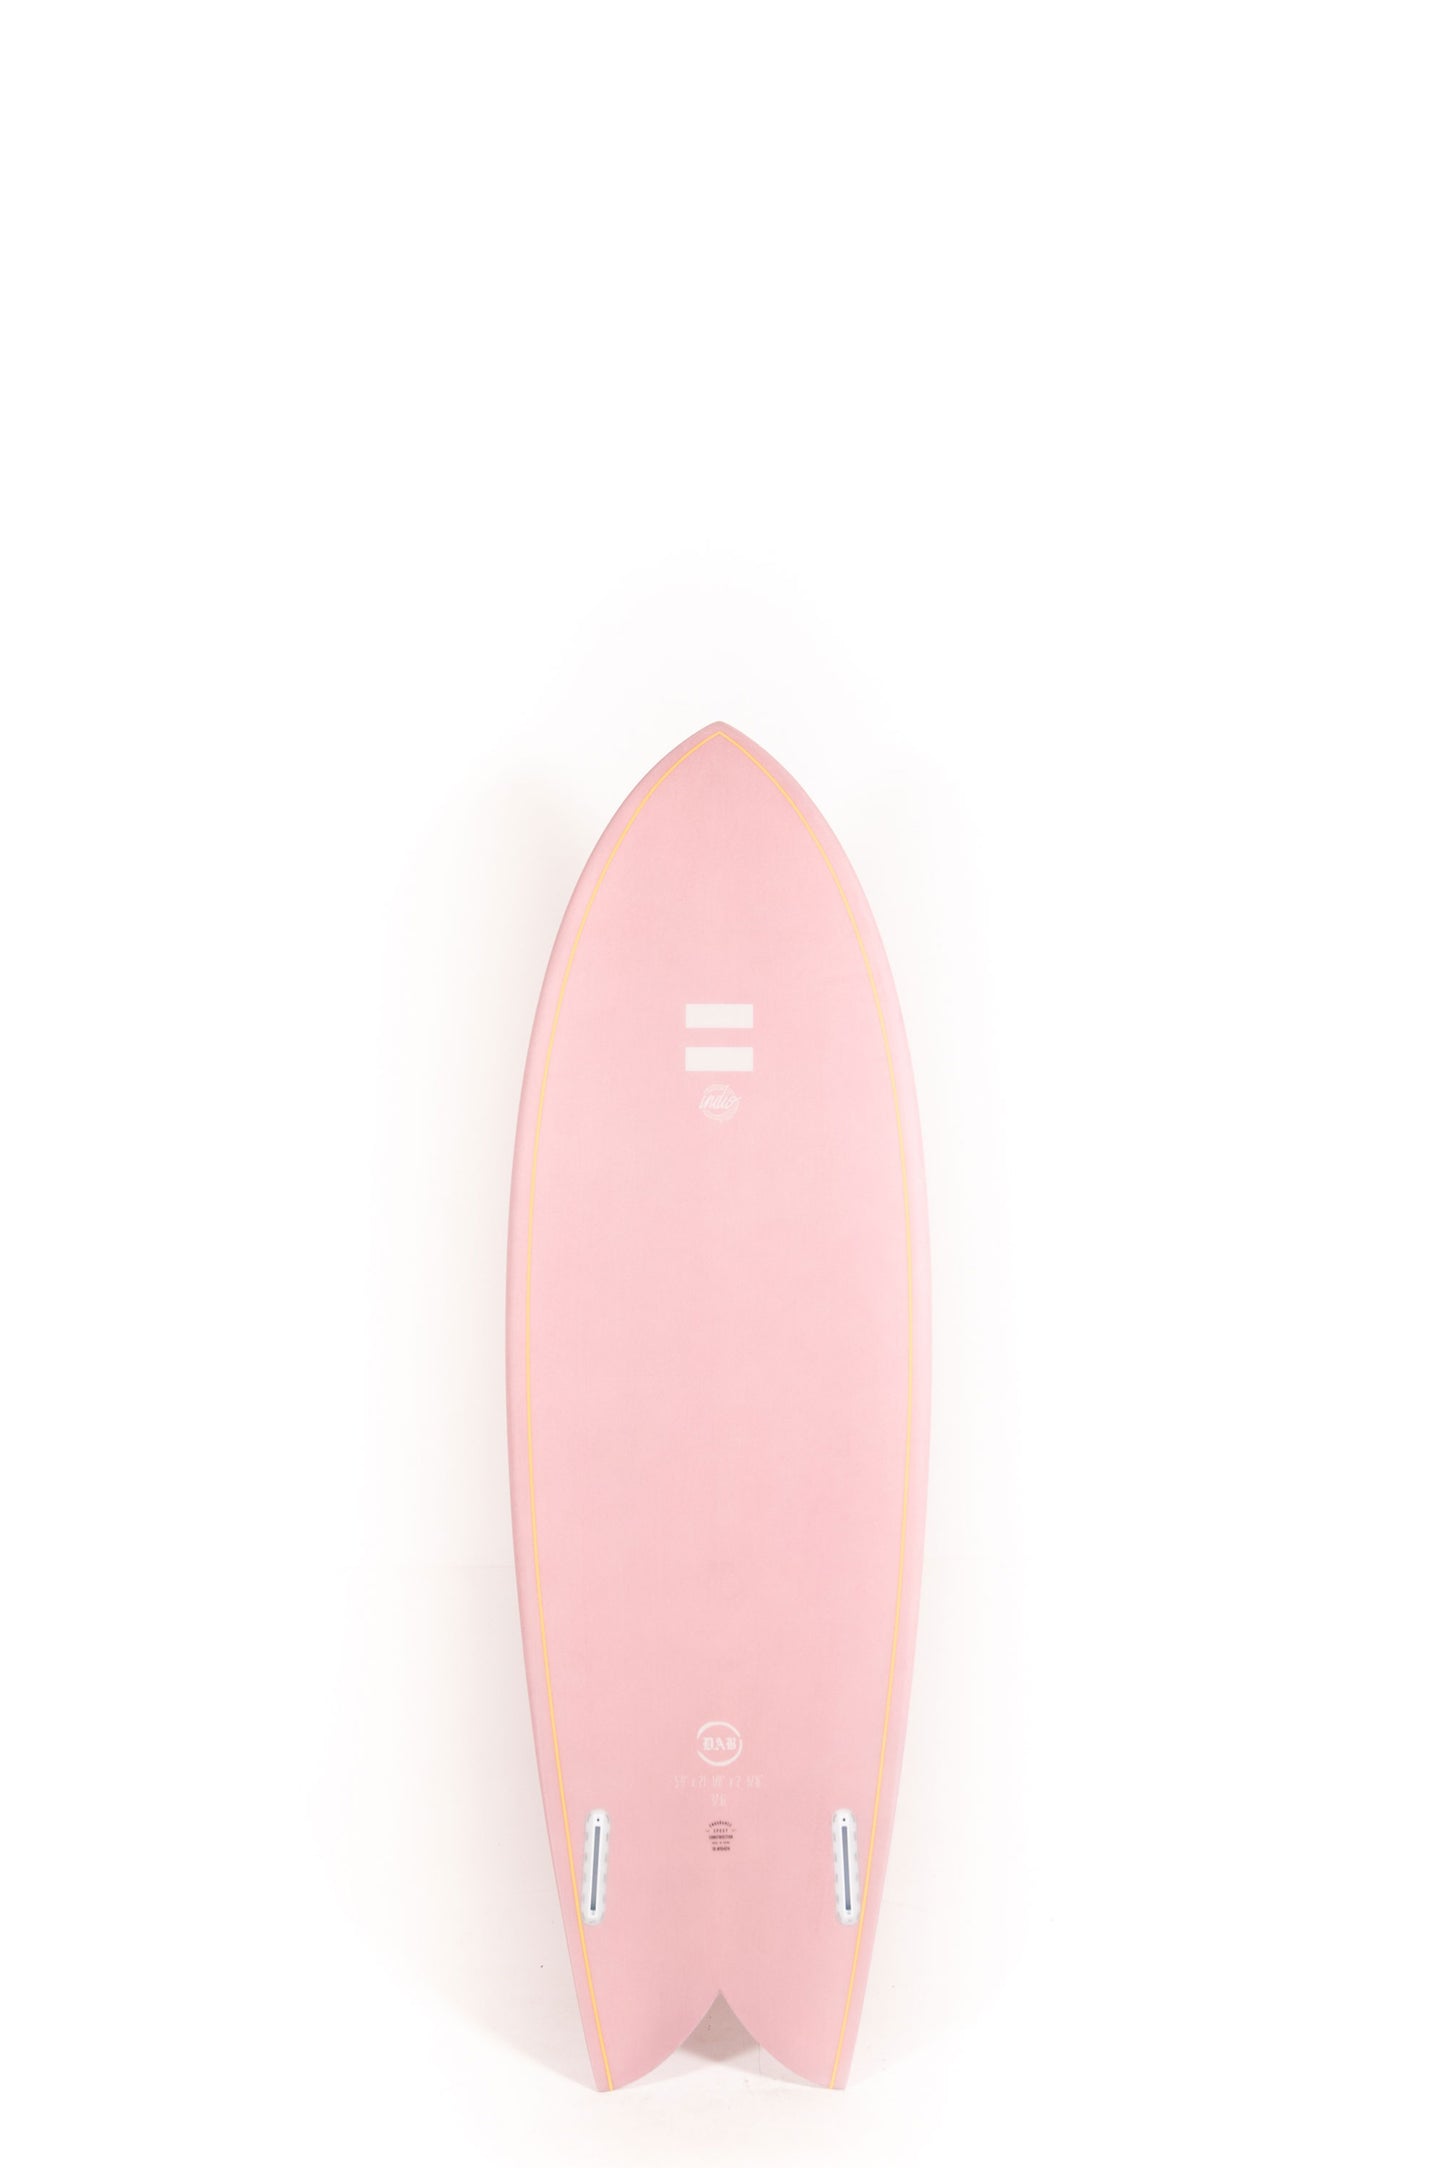 Pukas-Surf-Shop-Indio-Surfboards-Dab-pink-5_9